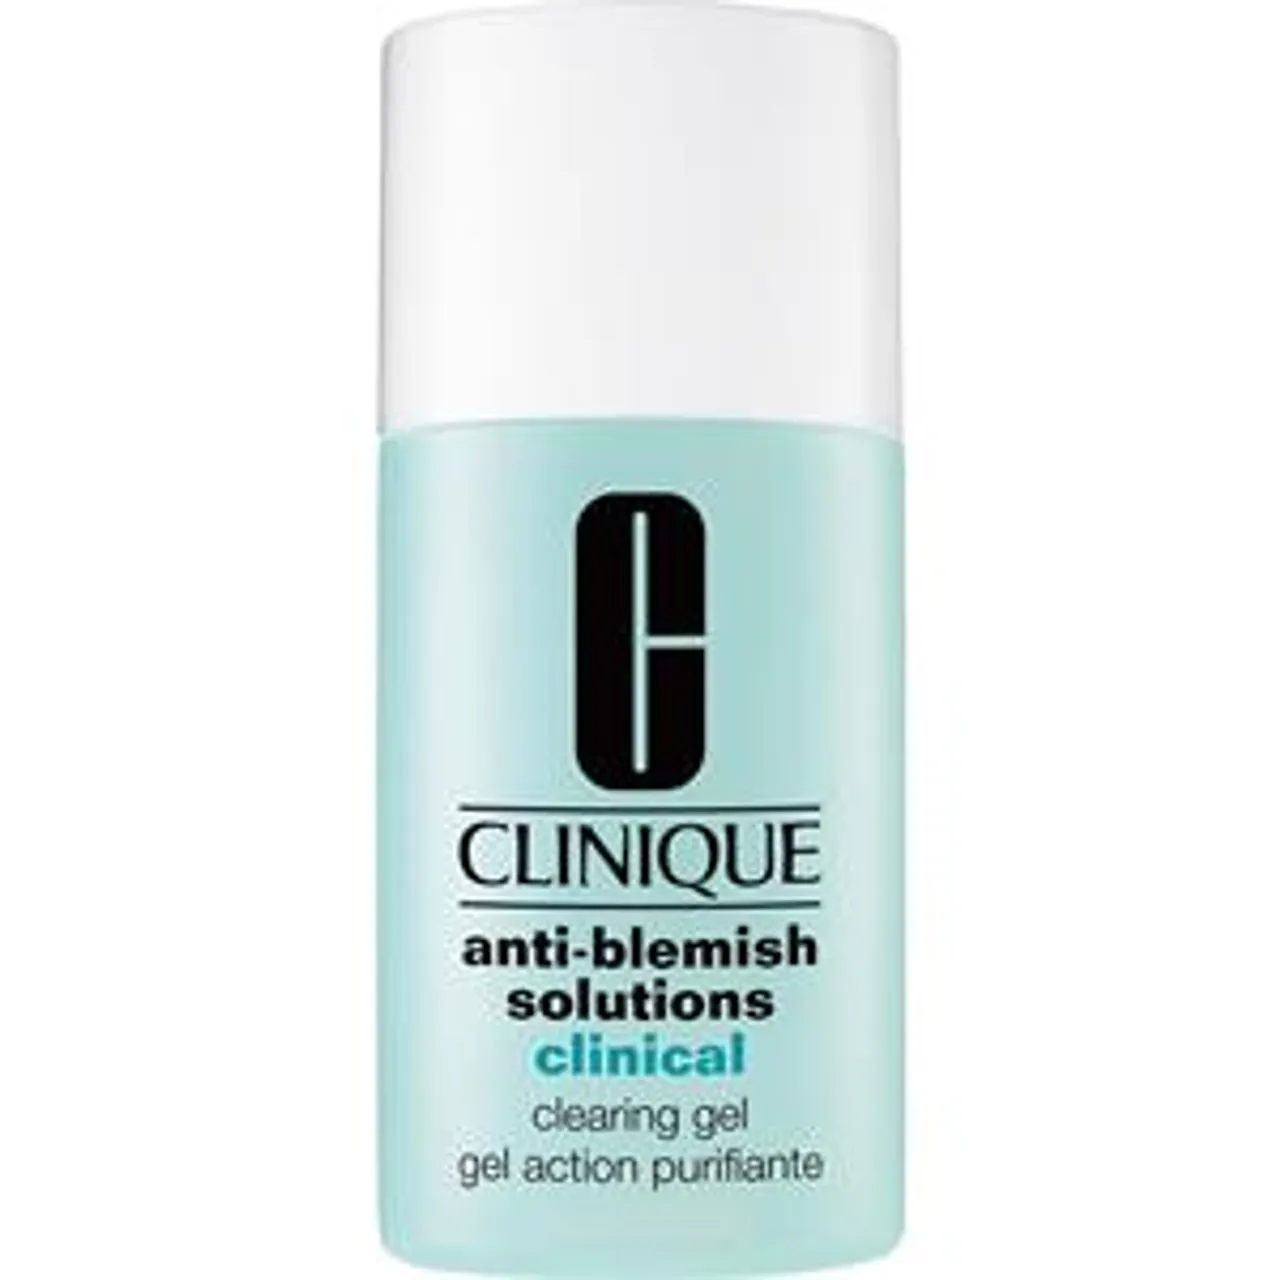 Clinique Anti-Blemish Solutions Clinical Clearing Gel Female 15 ml